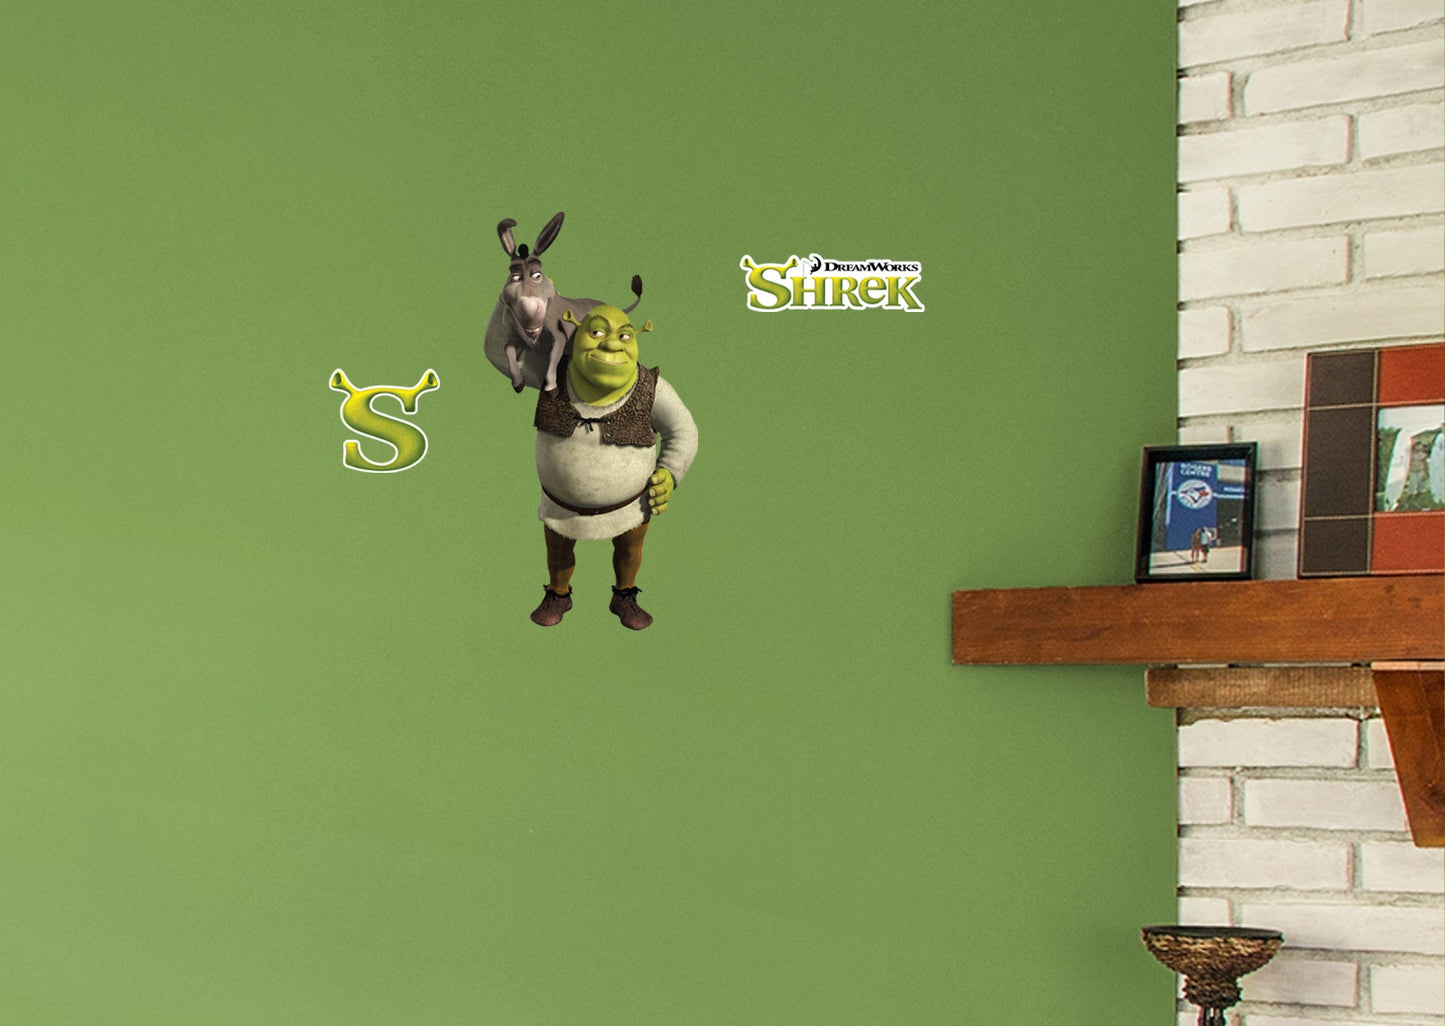 Shrek: Shrek and Donkey RealBig - Officially Licensed NBC Universal Removable Adhesive Decal